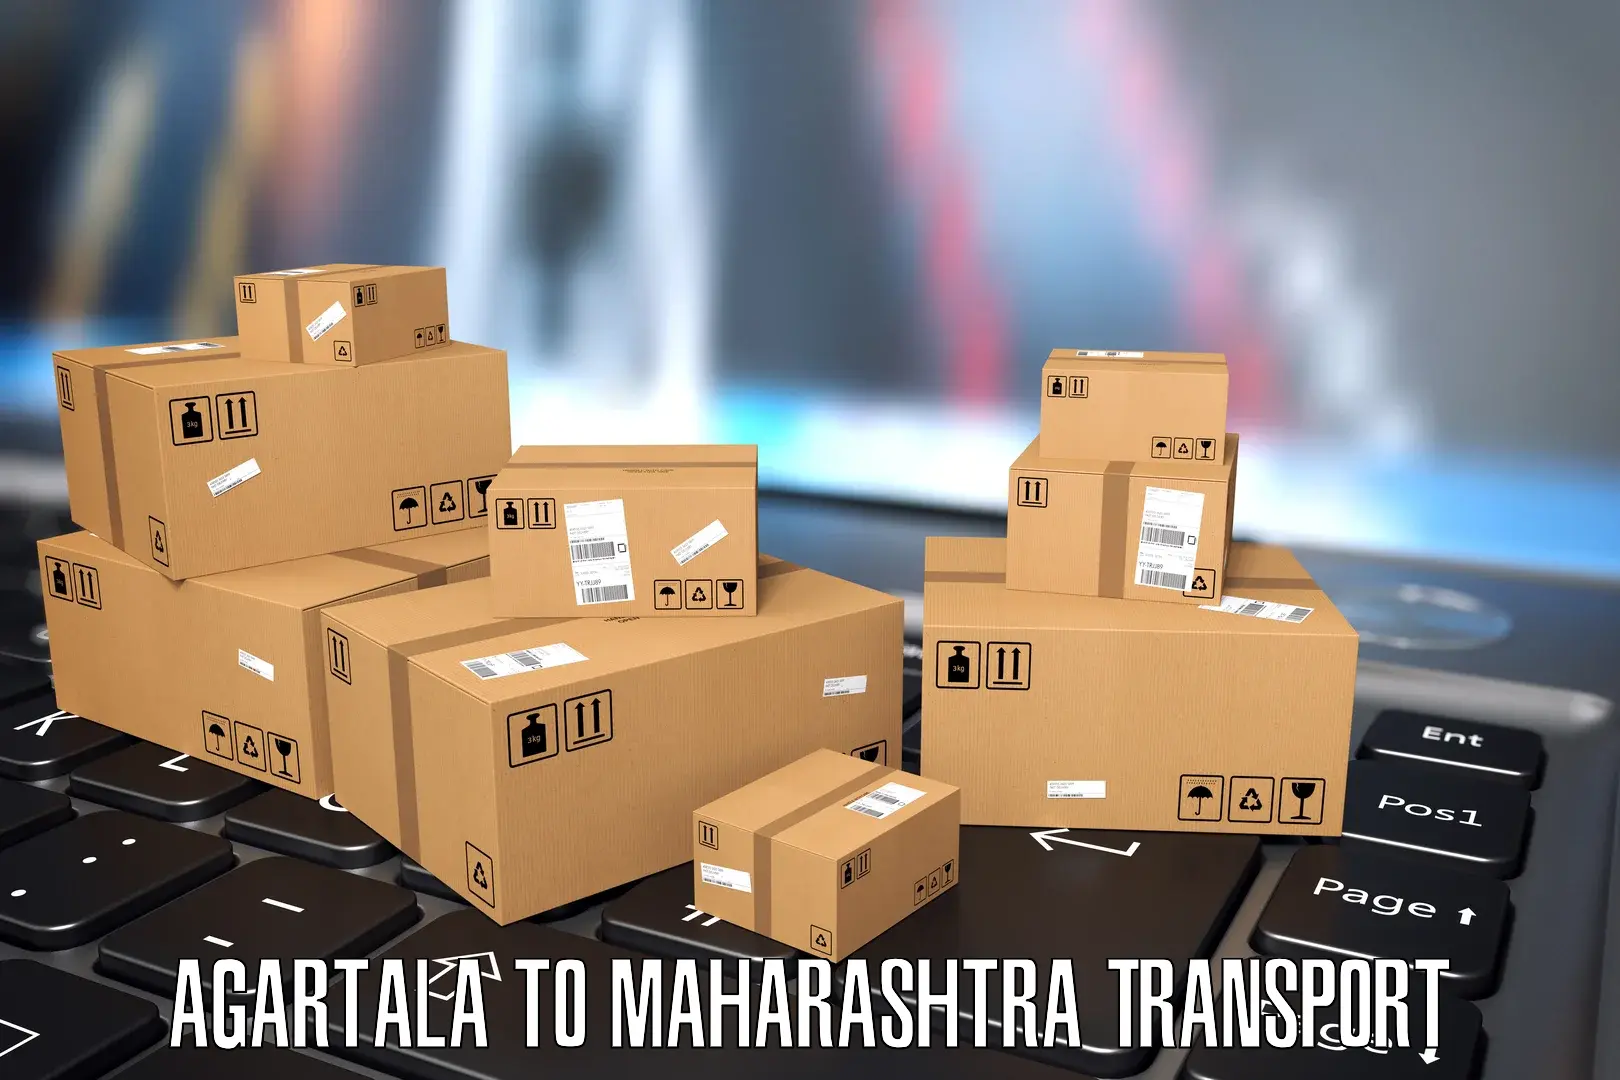 Delivery service Agartala to Parbhani